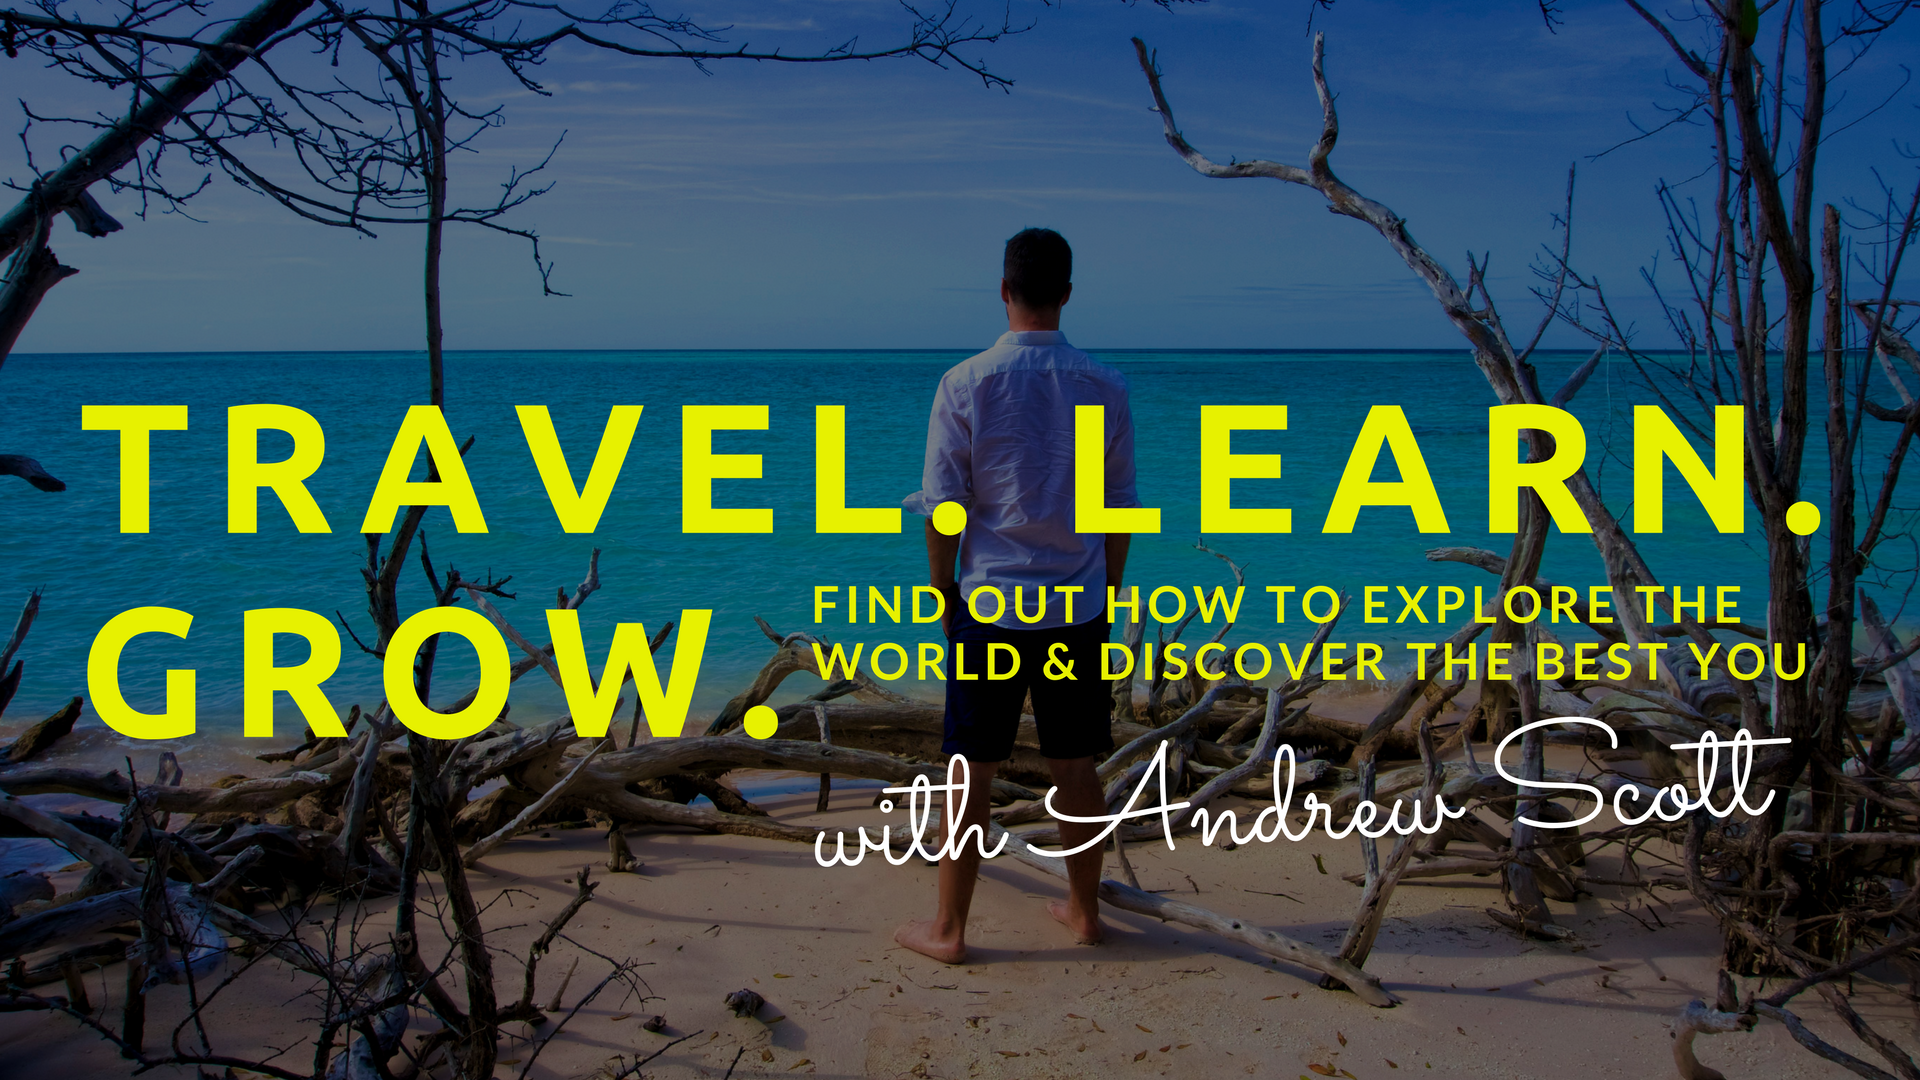 Authentic Travel & Cultural Experiences for the Mindful Traveler